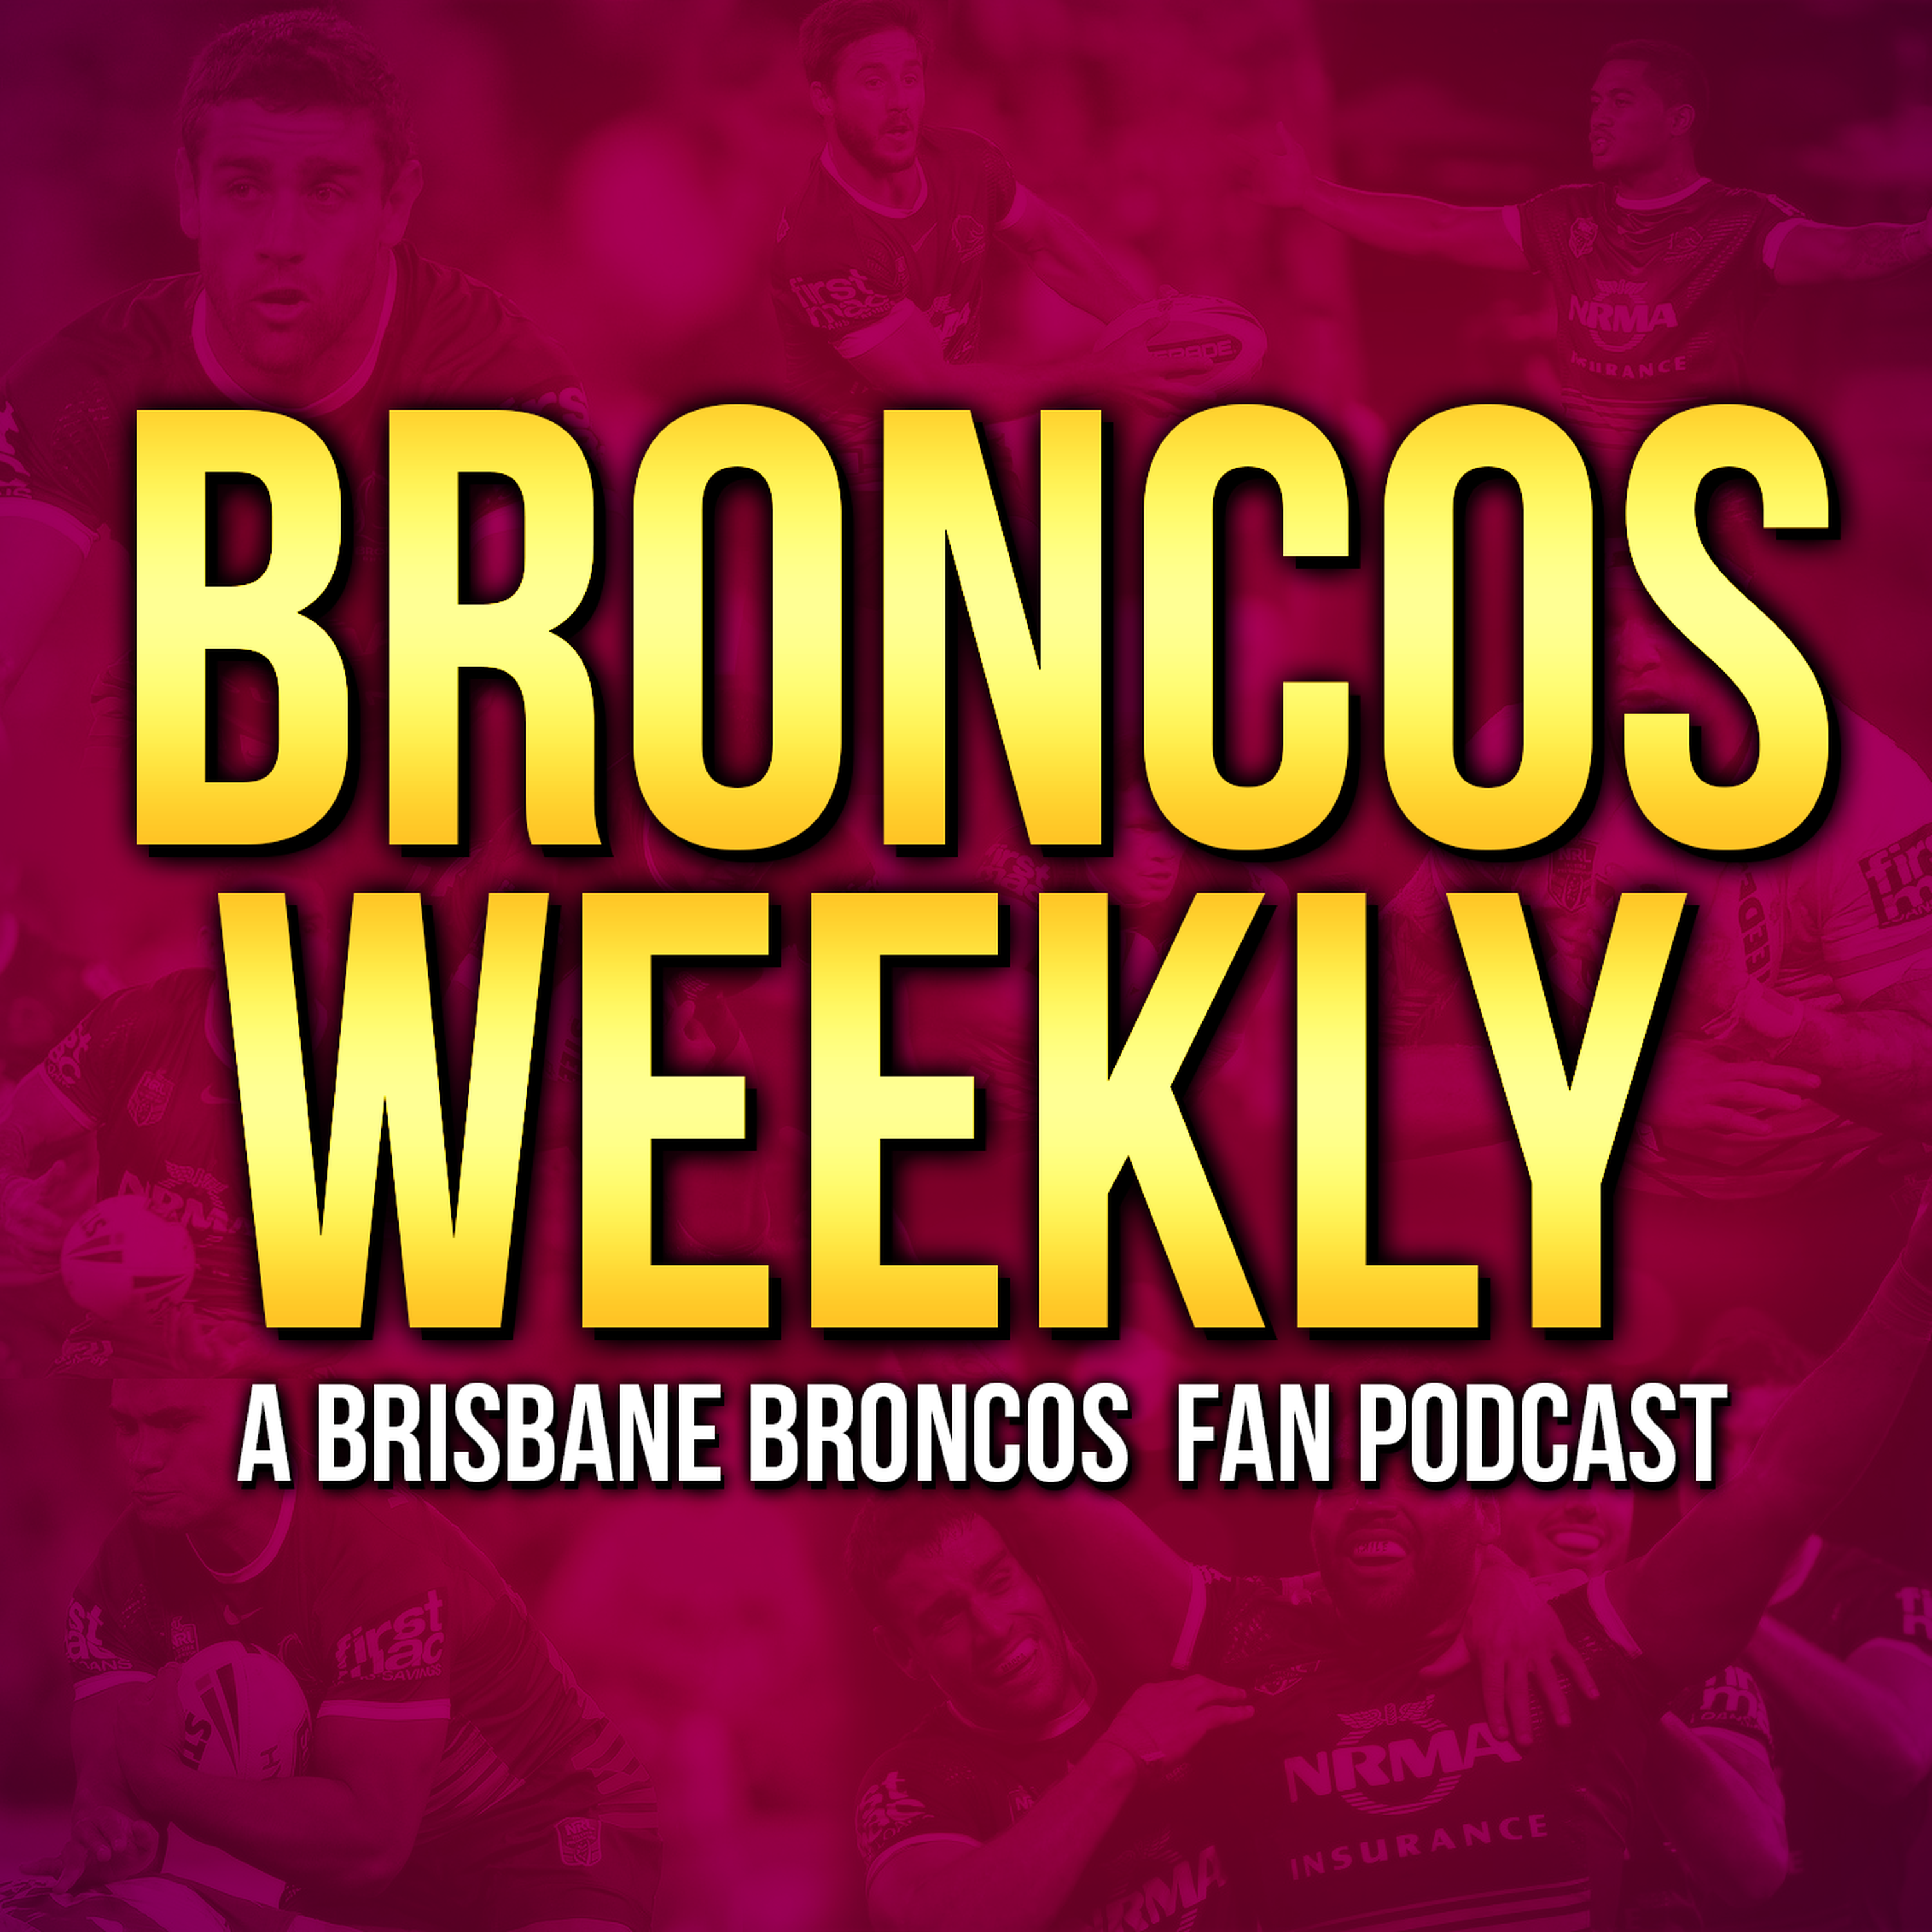 Broncos Yearly - 2021 Season Preview and General News ft. Chris Garry